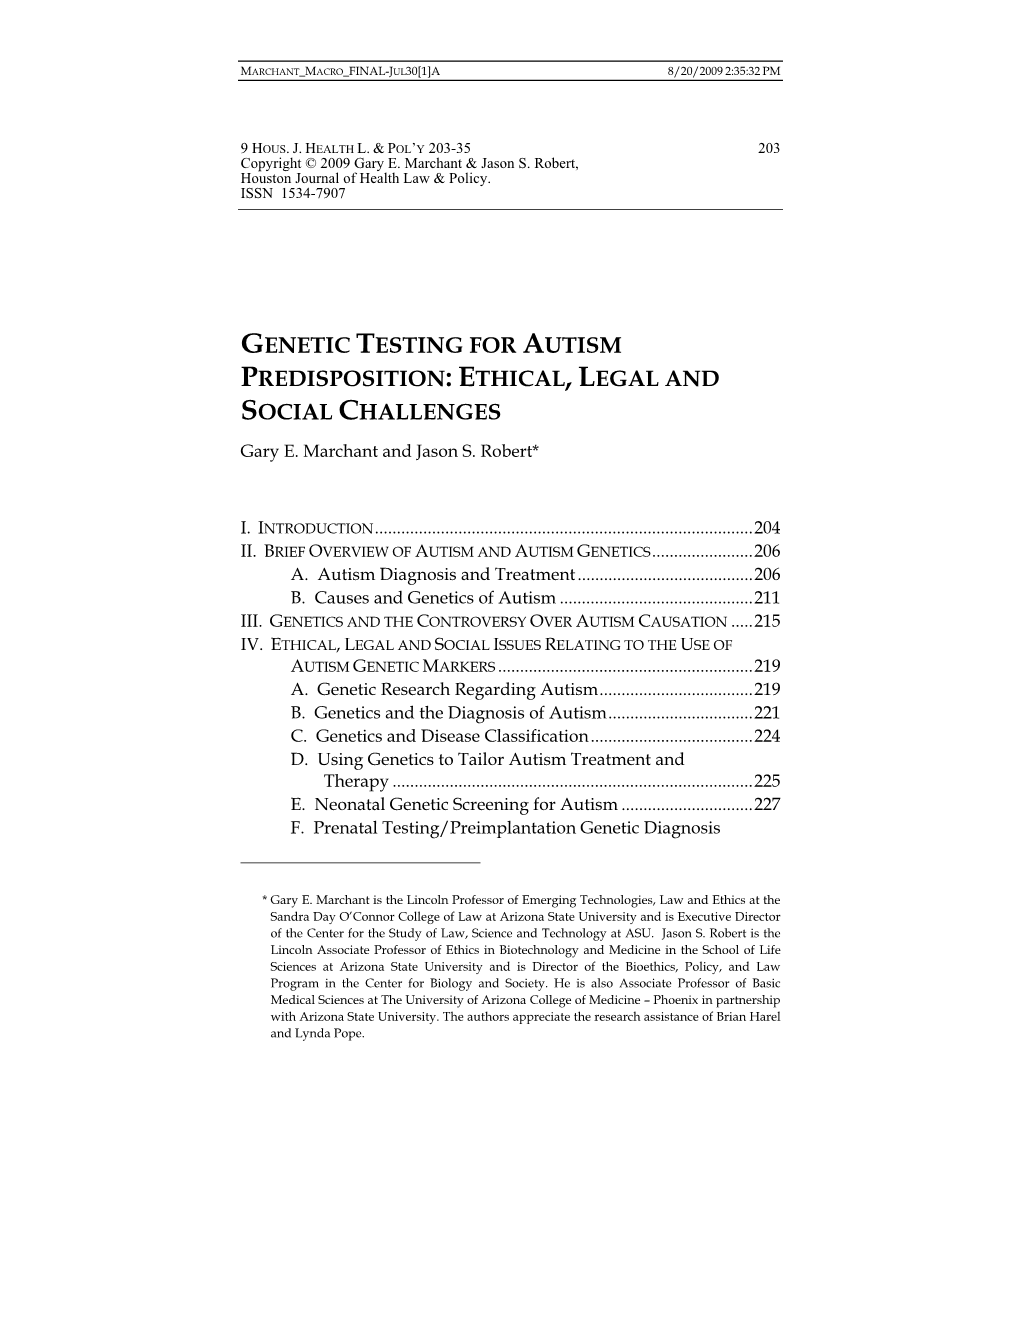 Genetic Testing for Autism Predisposition: Ethical, Legal, And